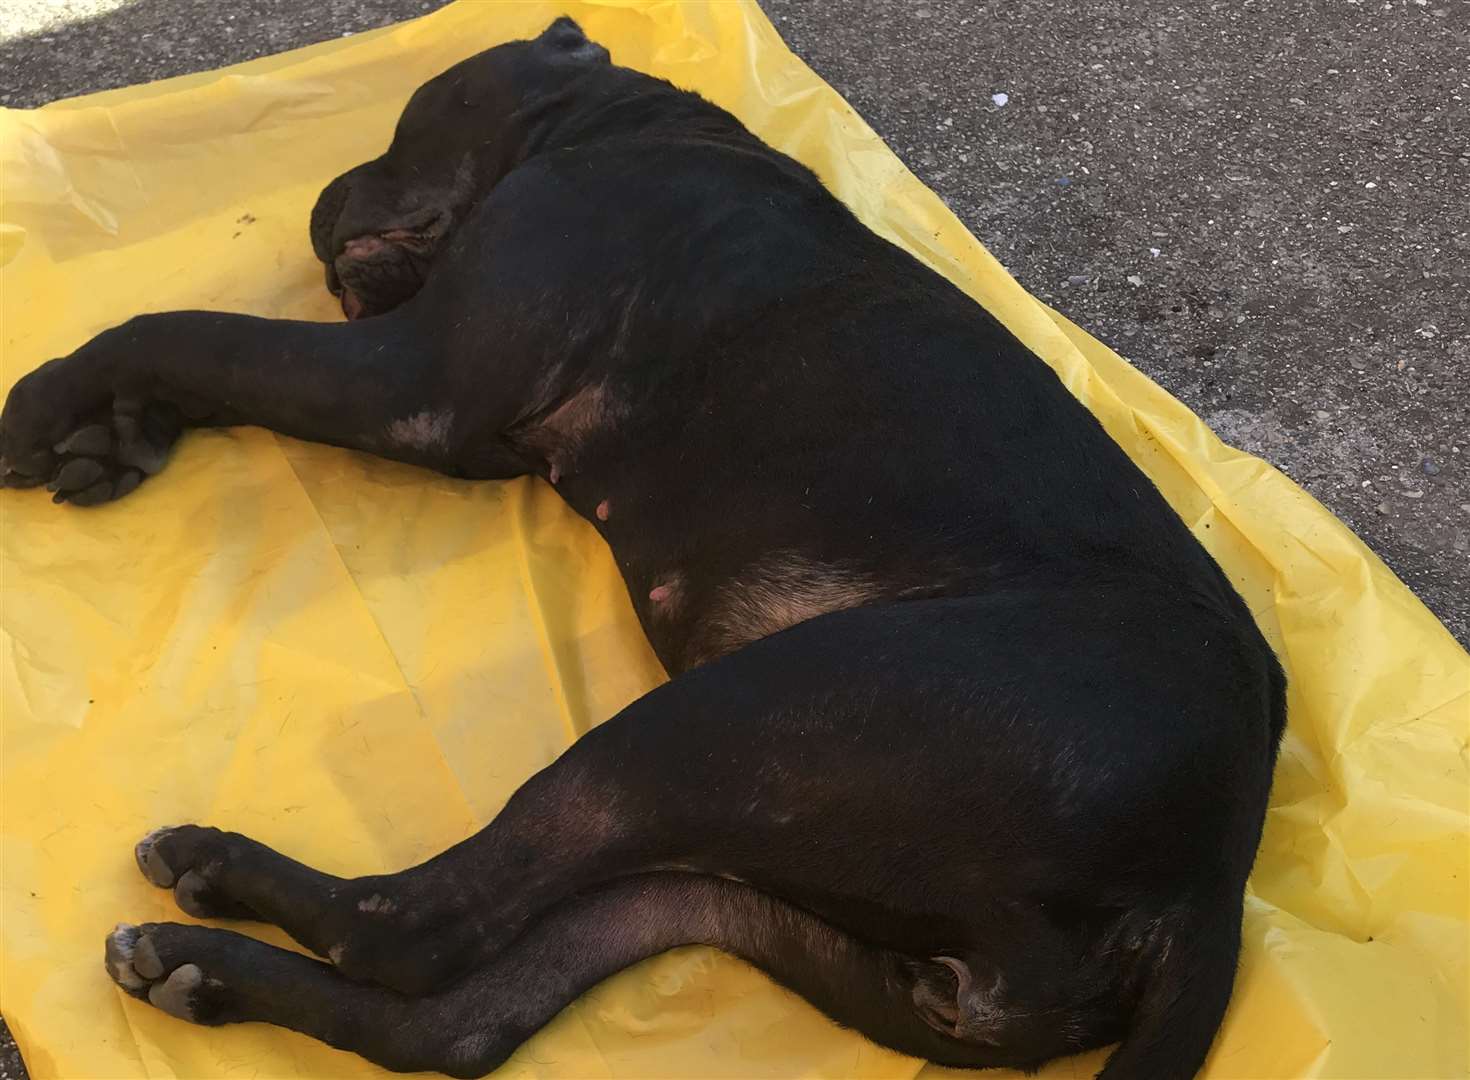 The body of a Cane Corso dog was found dumped in Erith